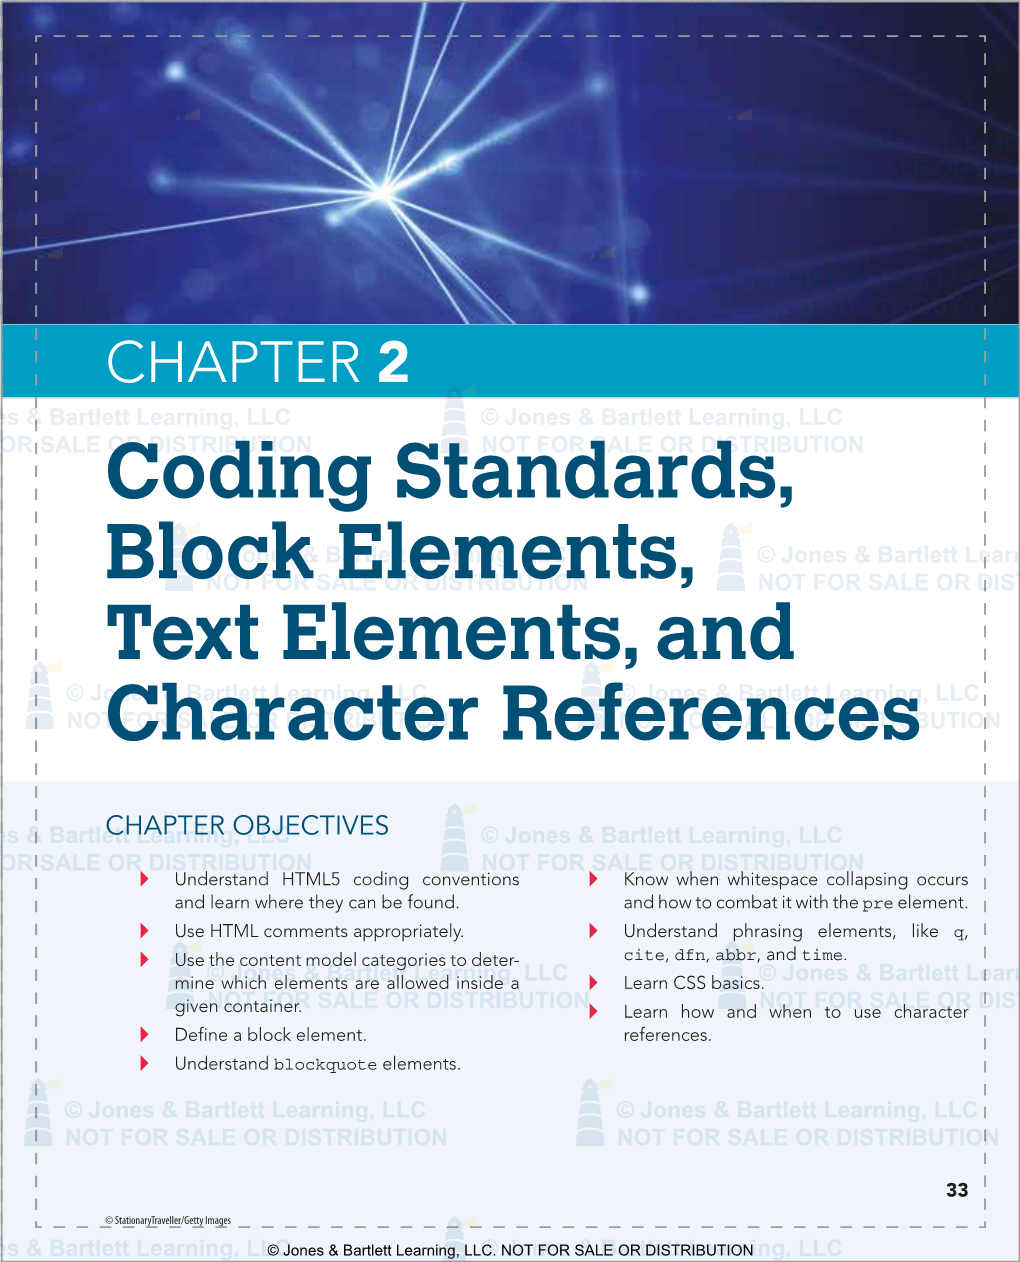 Coding Standards, Block Elements, Text Elements, and Character